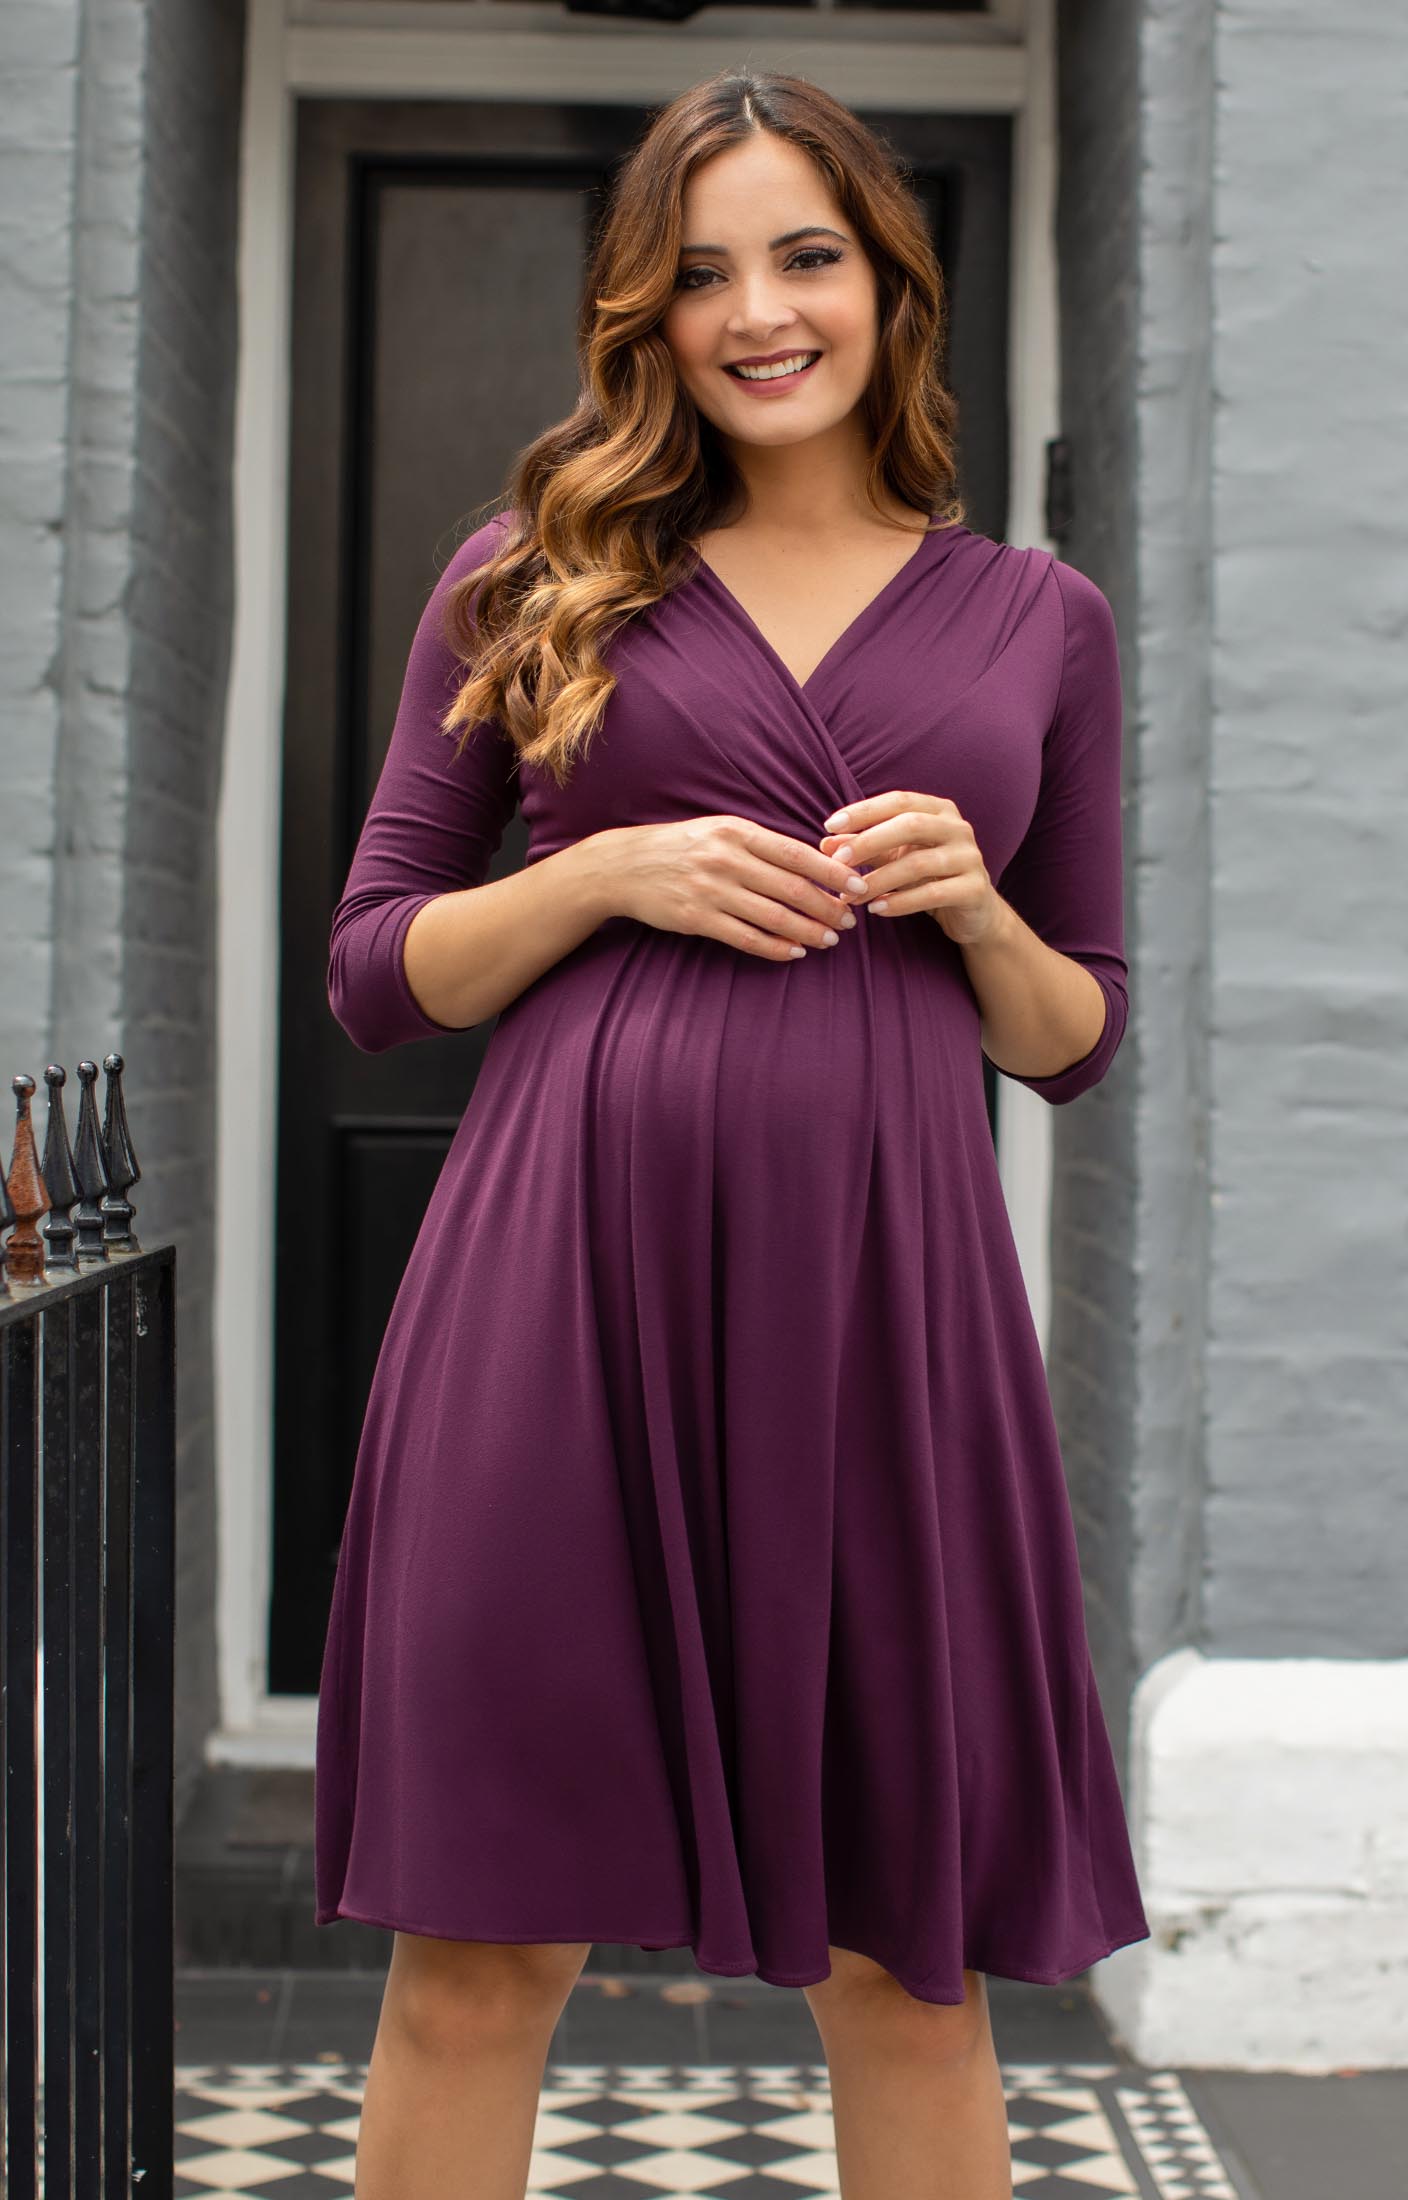 Willow Maternity Dress Short Claret Maternity Wedding Dresses Evening Wear And Party Clothes 